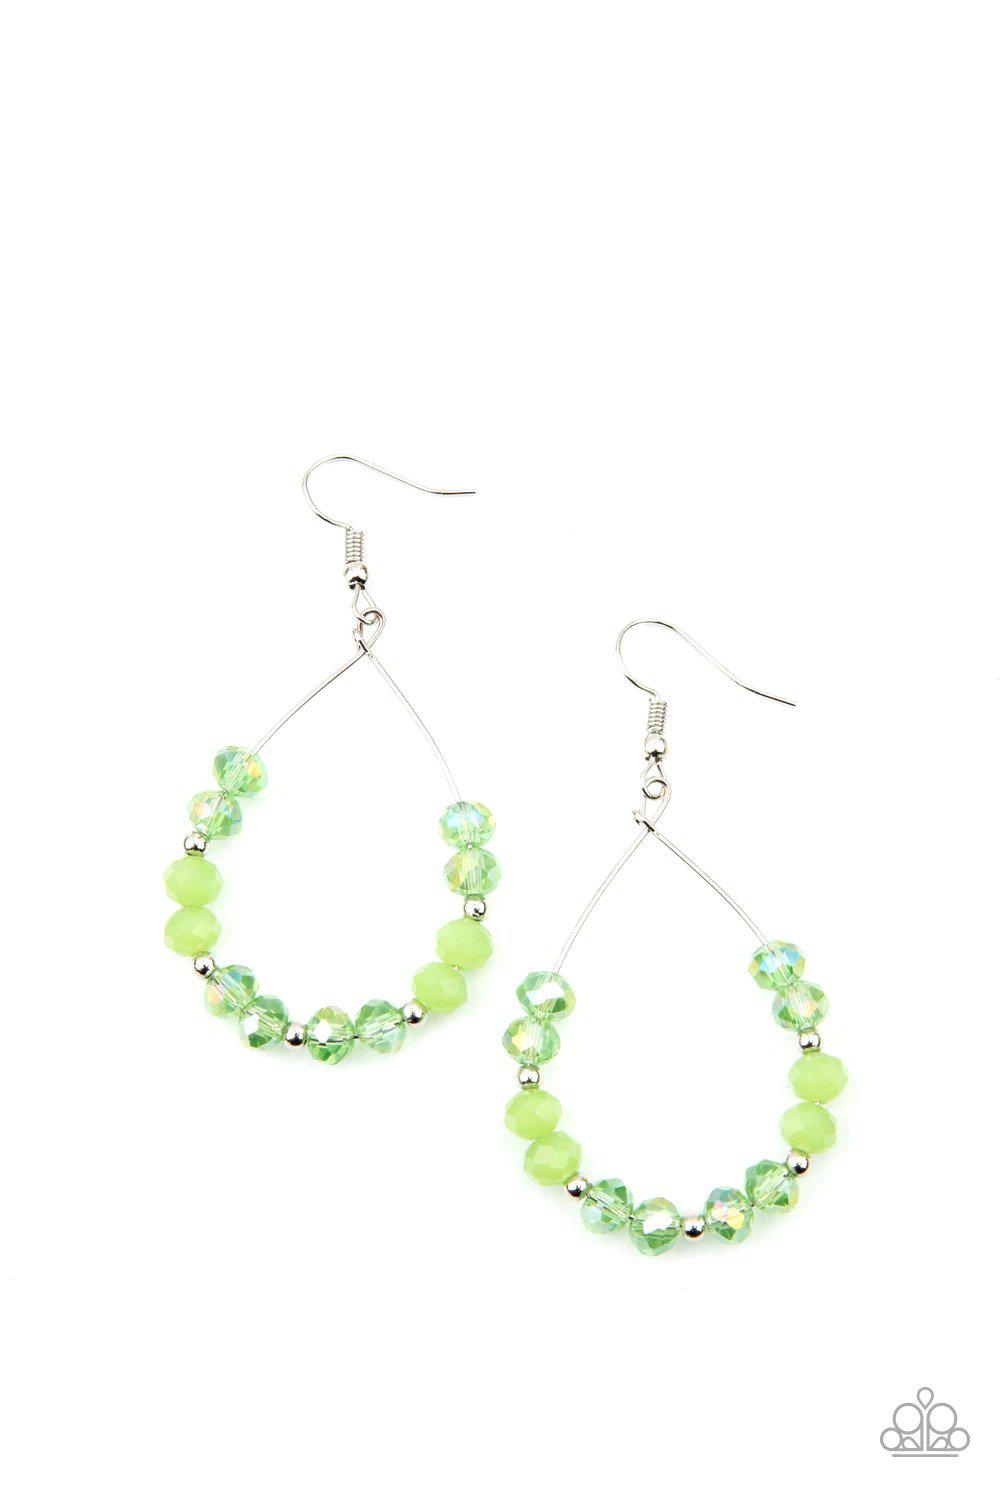 Wink Wink Green Earrings - Paparazzi Accessories- lightbox - CarasShop.com - $5 Jewelry by Cara Jewels